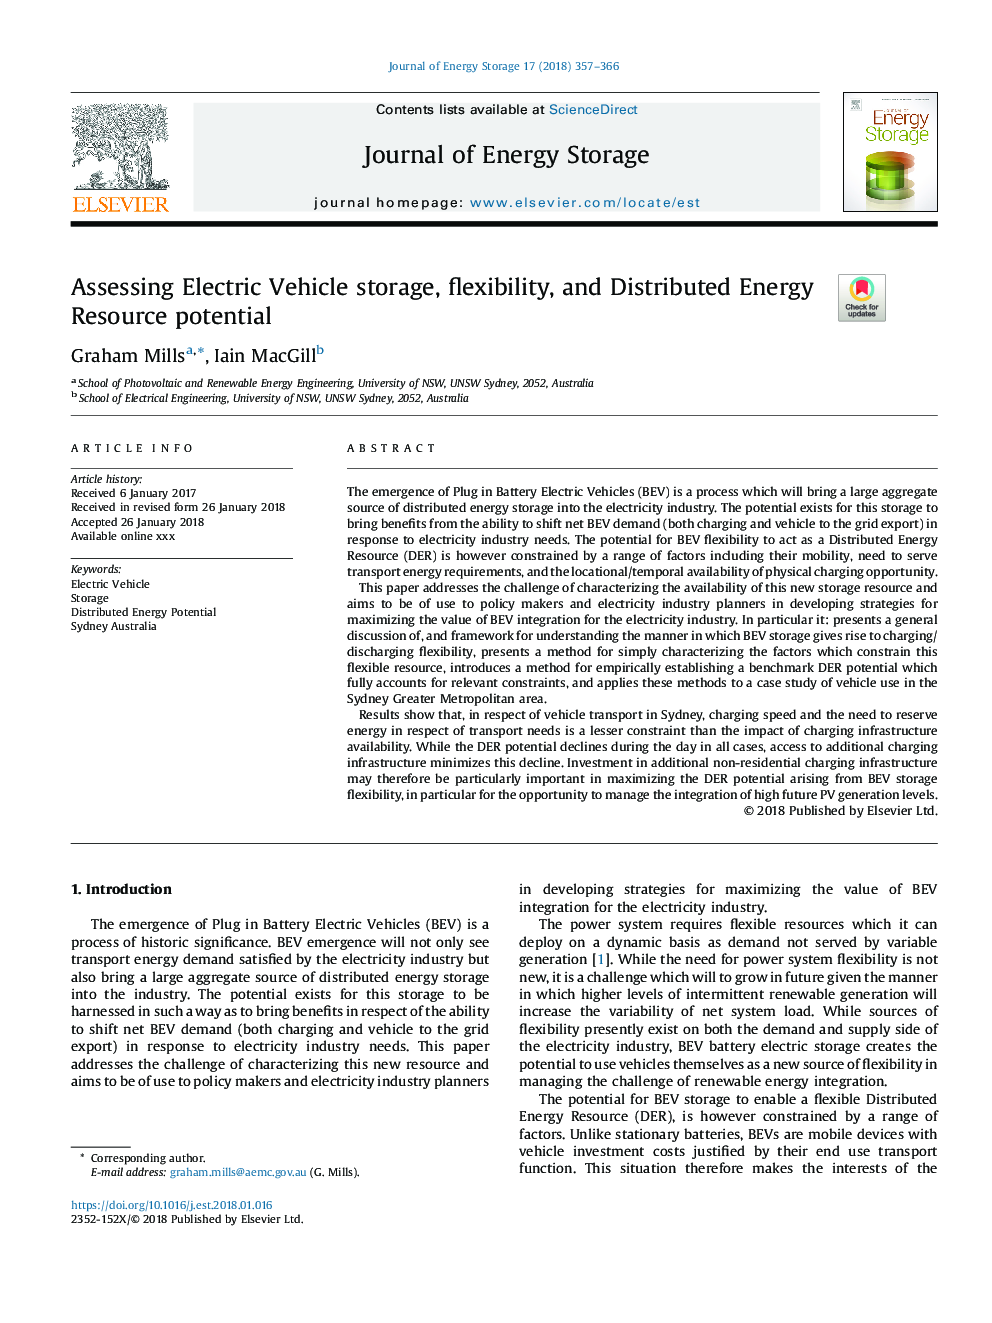 Assessing Electric Vehicle storage, flexibility, and Distributed Energy Resource potential